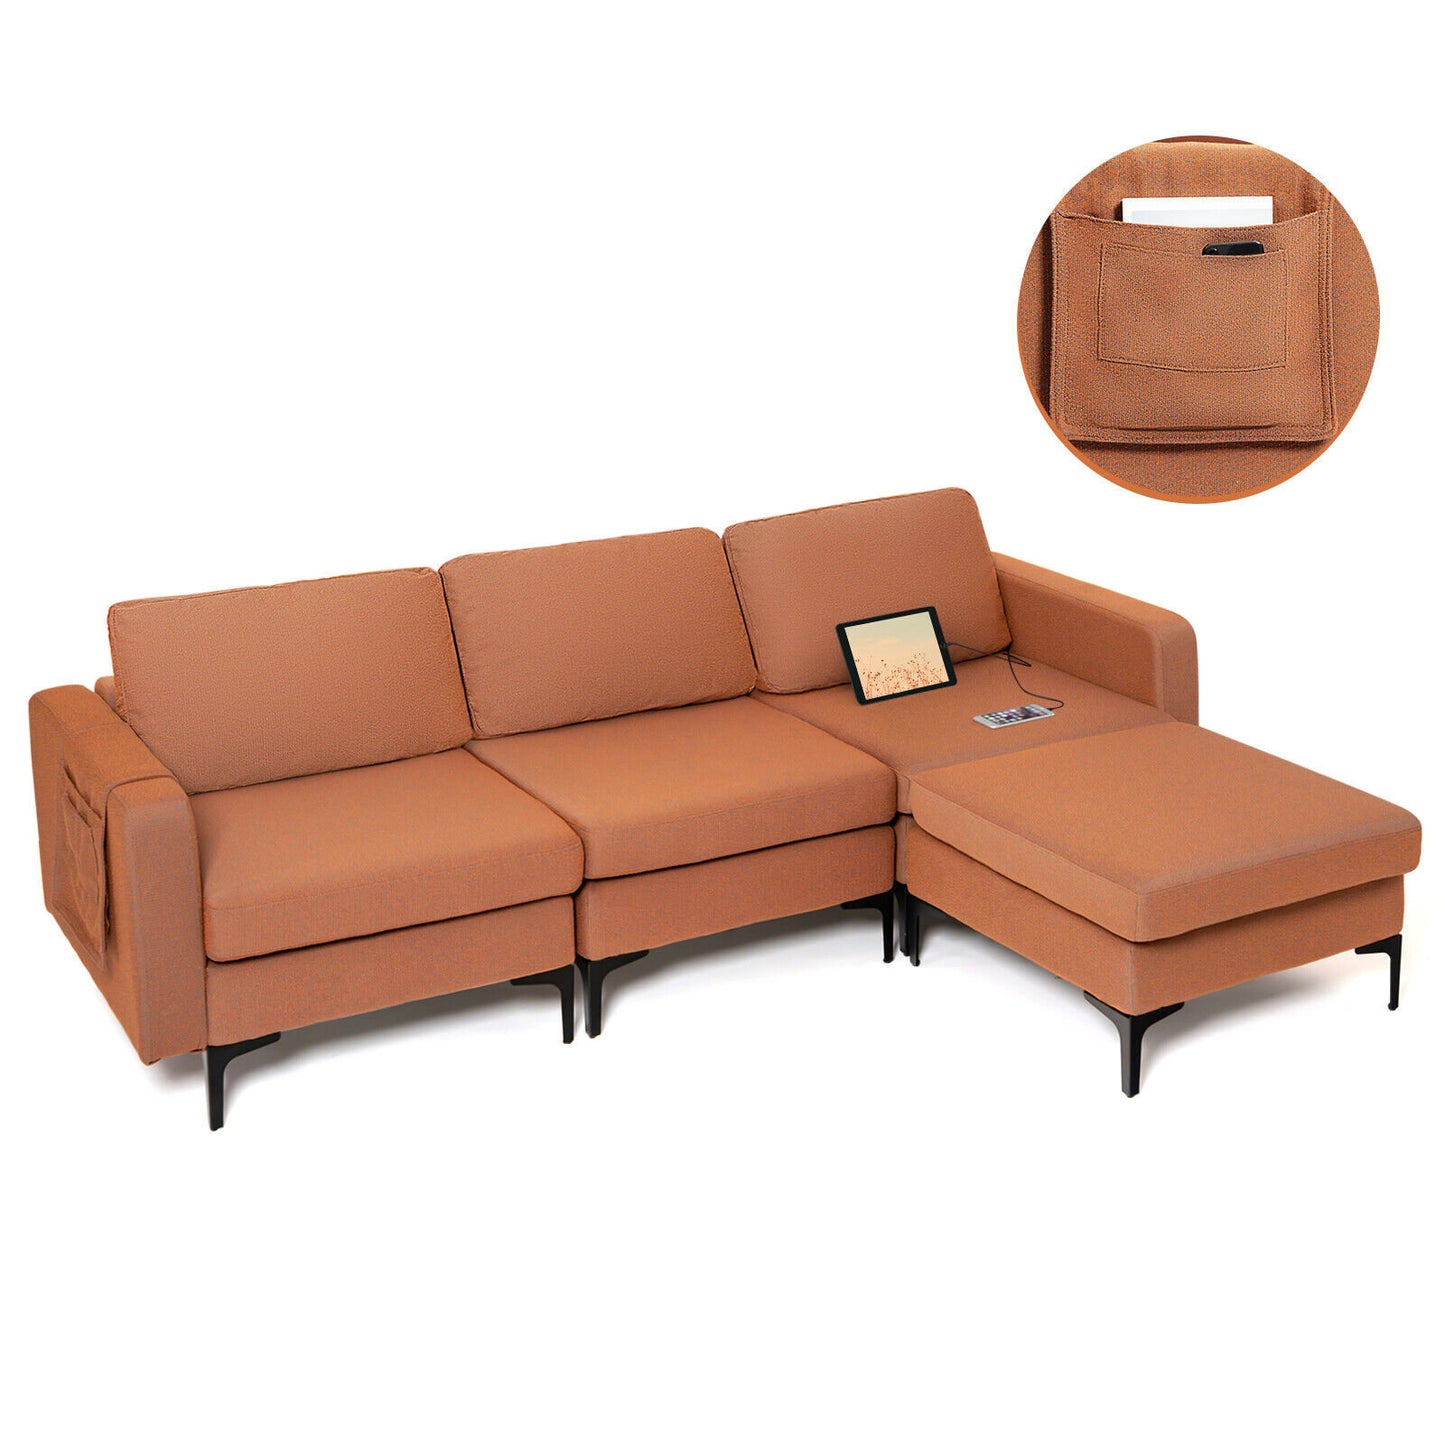 Modular L-shaped Sectional Sofa with Reversible Chaise and 2 USB Ports, Orange